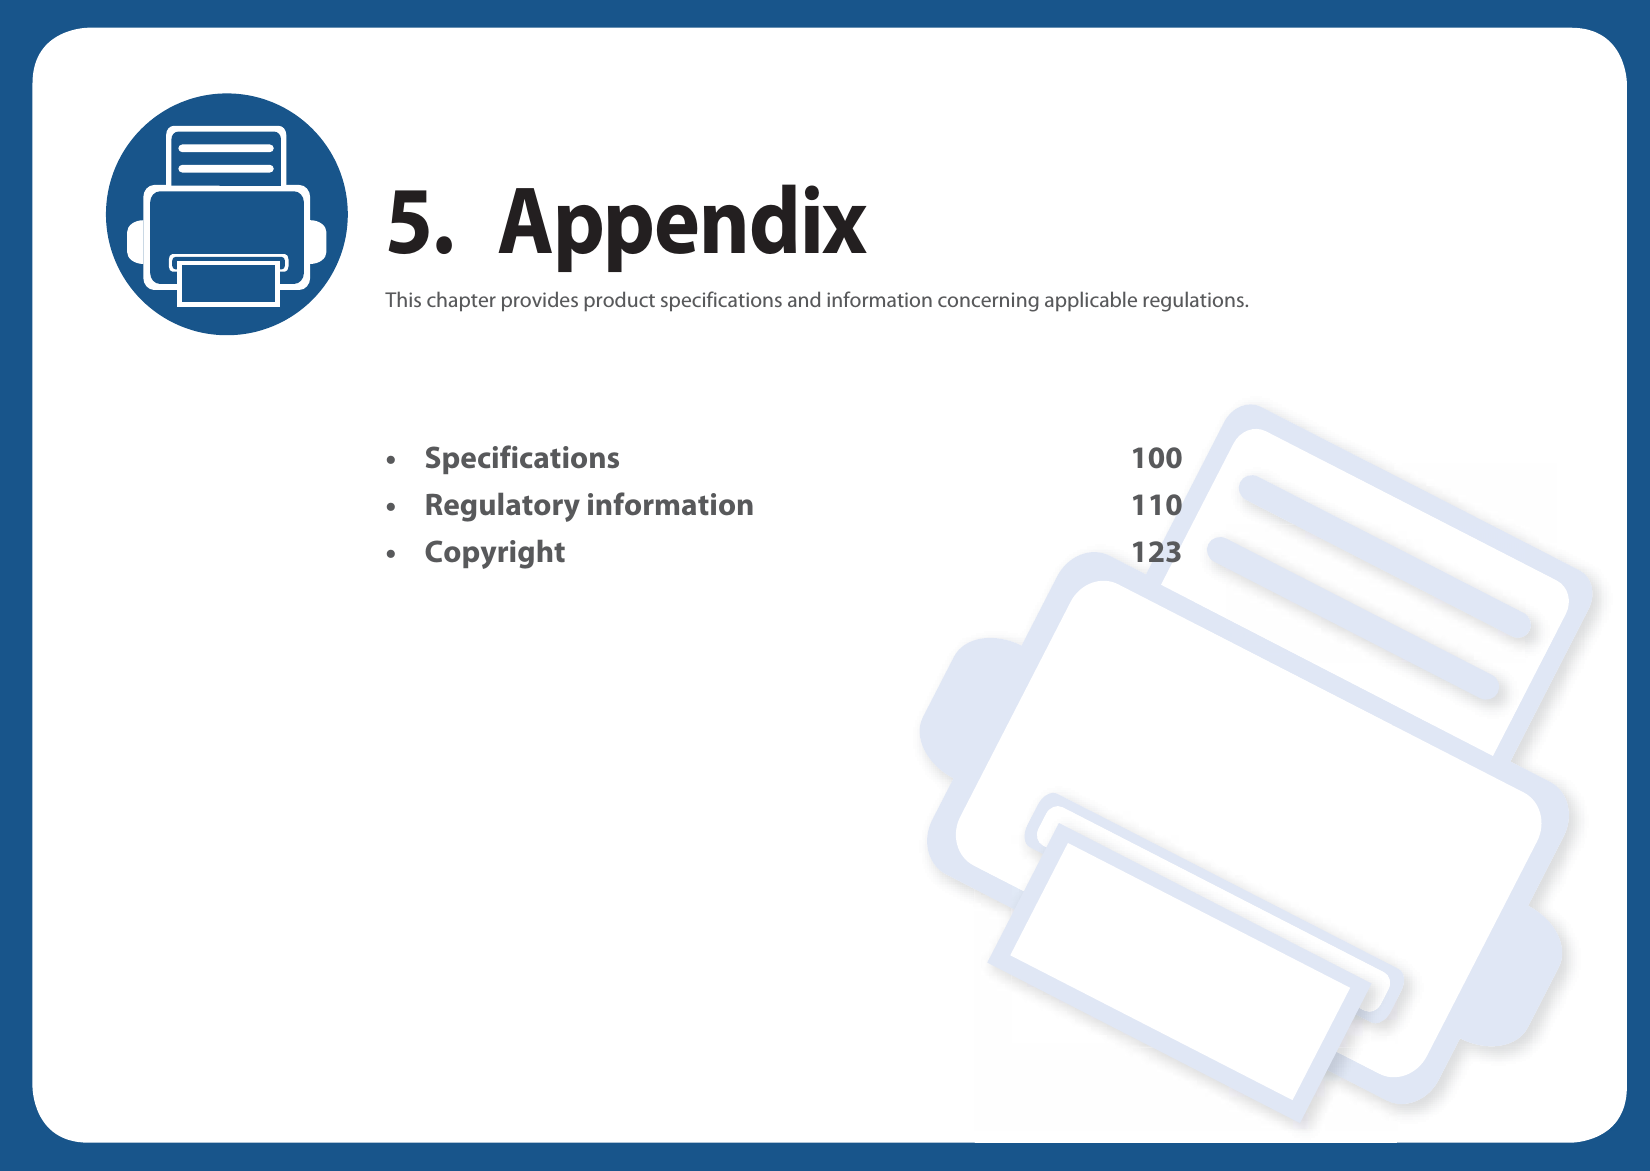 5. AppendixThis chapter provides product specifications and information concerning applicable regulations.• Specifications 100• Regulatory information 110• Copyright 123